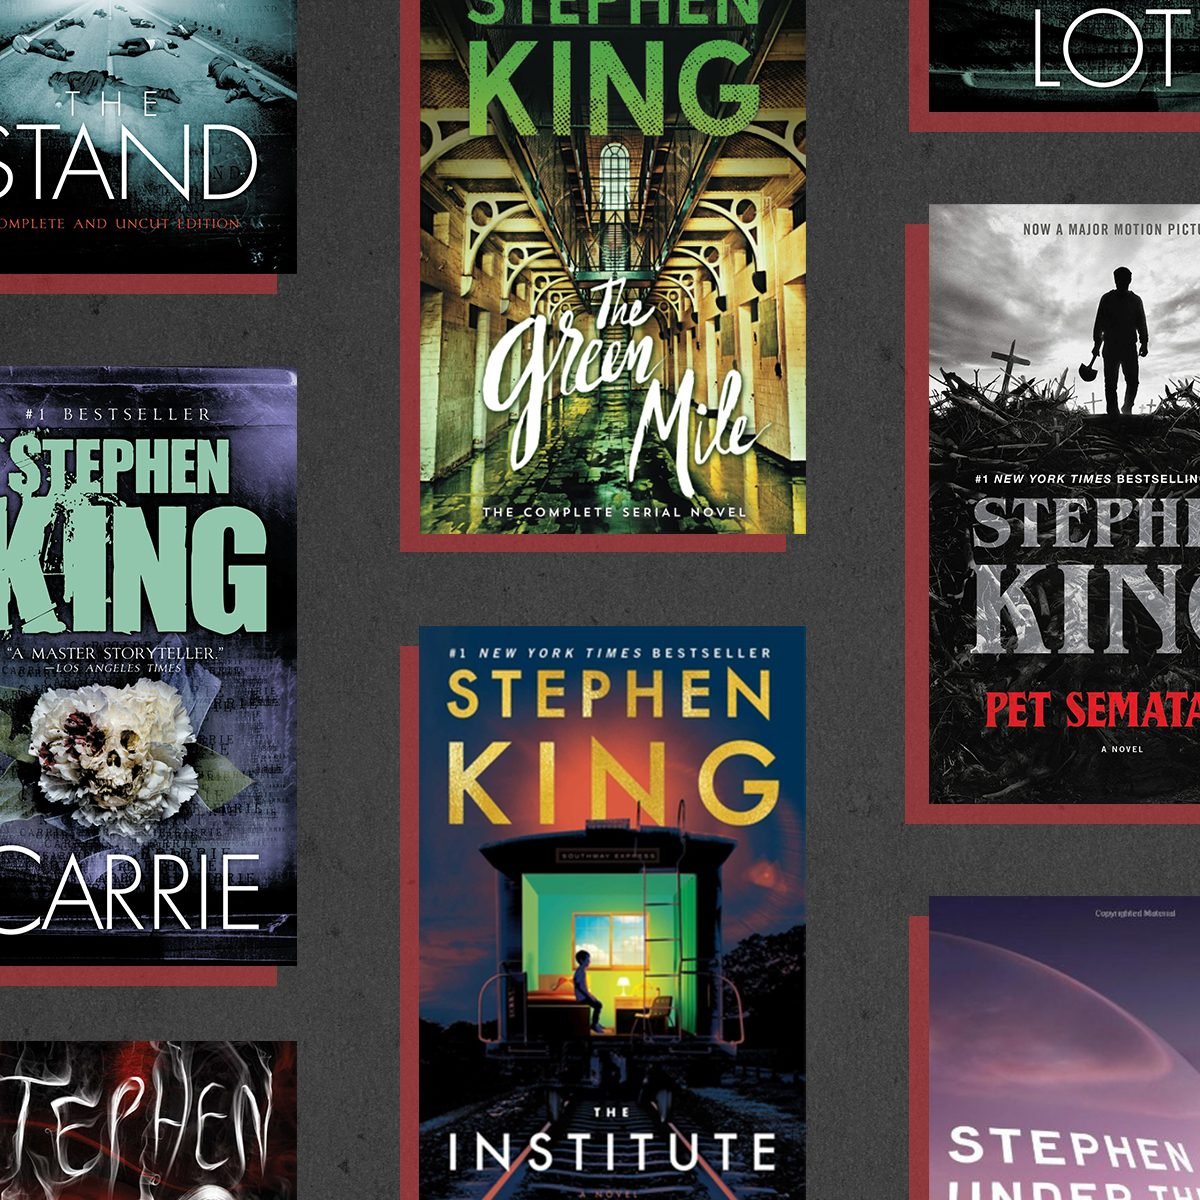  Stephen King Collection 4 Books Set (Pet Sematary, The